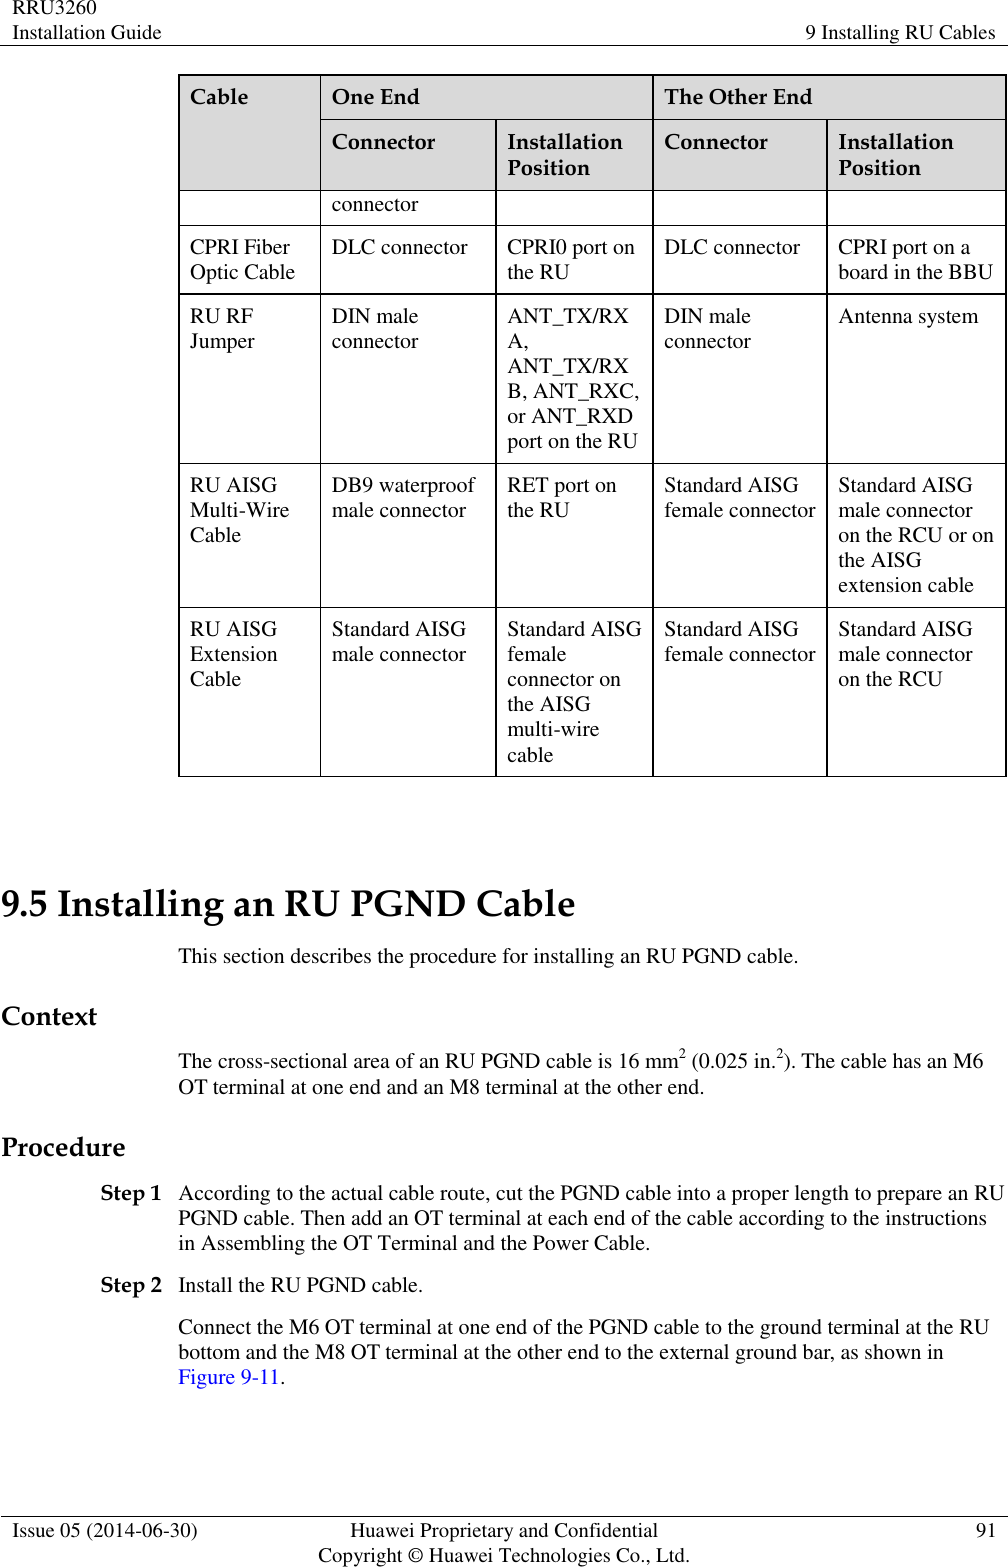 RRU3260 Installation Guide 9 Installing RU Cables  Issue 05 (2014-06-30) Huawei Proprietary and Confidential                                     Copyright © Huawei Technologies Co., Ltd. 91  Cable One End The Other End Connector Installation Position Connector Installation Position connector CPRI Fiber Optic Cable DLC connector CPRI0 port on the RU DLC connector CPRI port on a board in the BBU RU RF Jumper DIN male connector ANT_TX/RXA, ANT_TX/RXB, ANT_RXC, or ANT_RXD port on the RU DIN male connector Antenna system RU AISG Multi-Wire Cable DB9 waterproof male connector RET port on the RU Standard AISG female connector Standard AISG male connector on the RCU or on the AISG extension cable RU AISG Extension Cable Standard AISG male connector Standard AISG female connector on the AISG multi-wire cable Standard AISG female connector Standard AISG male connector on the RCU  9.5 Installing an RU PGND Cable This section describes the procedure for installing an RU PGND cable. Context The cross-sectional area of an RU PGND cable is 16 mm2 (0.025 in.2). The cable has an M6 OT terminal at one end and an M8 terminal at the other end. Procedure Step 1 According to the actual cable route, cut the PGND cable into a proper length to prepare an RU PGND cable. Then add an OT terminal at each end of the cable according to the instructions in Assembling the OT Terminal and the Power Cable. Step 2 Install the RU PGND cable. Connect the M6 OT terminal at one end of the PGND cable to the ground terminal at the RU bottom and the M8 OT terminal at the other end to the external ground bar, as shown in Figure 9-11.   